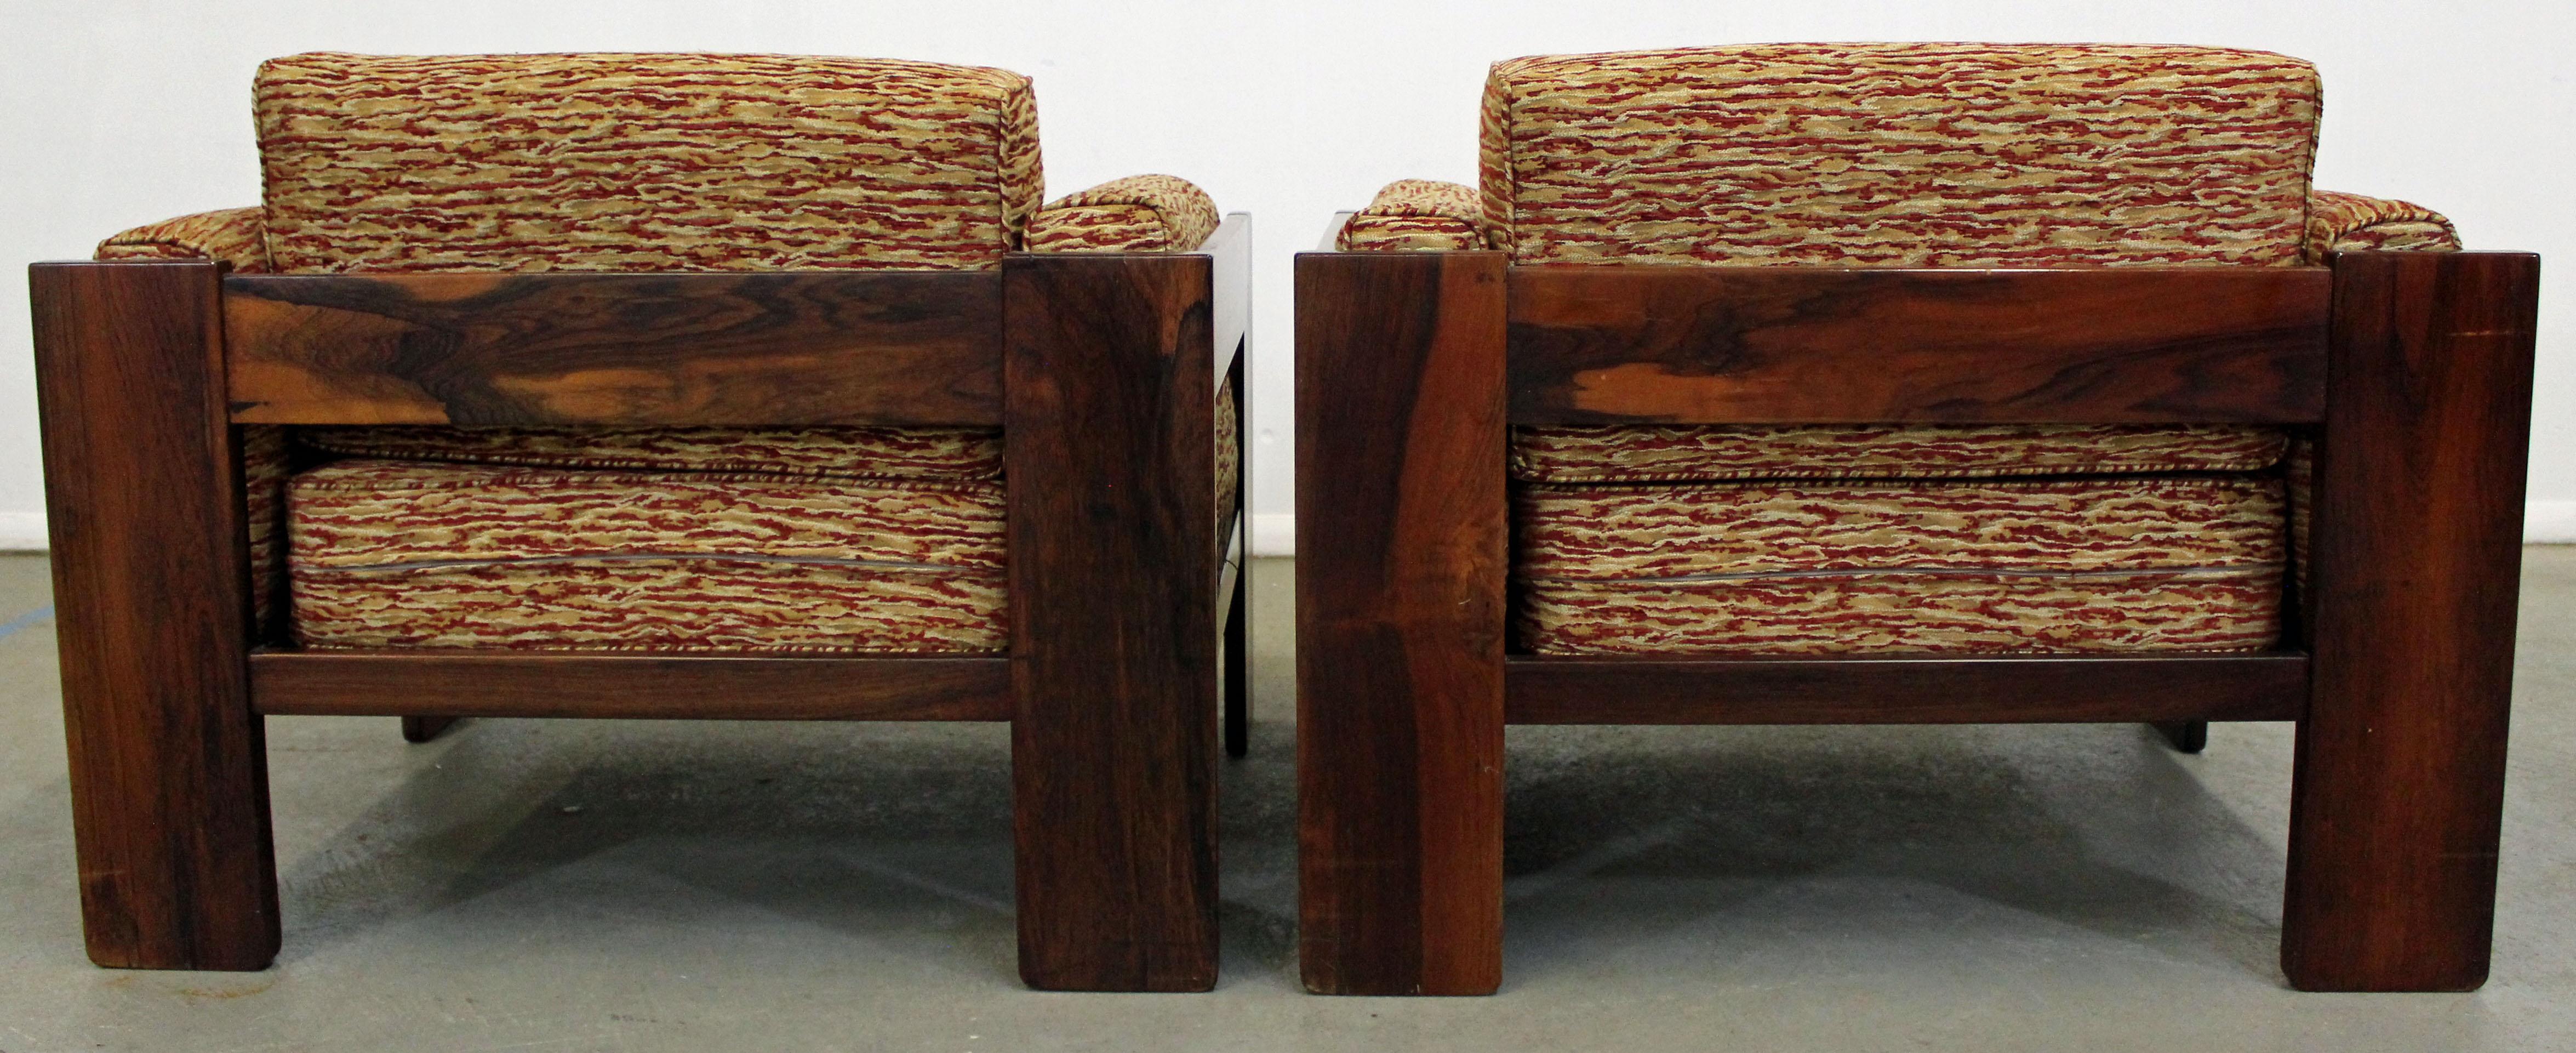 Fabric Pair of Mid-Century Modern Bastiano Rosewood Knoll Club Chairs